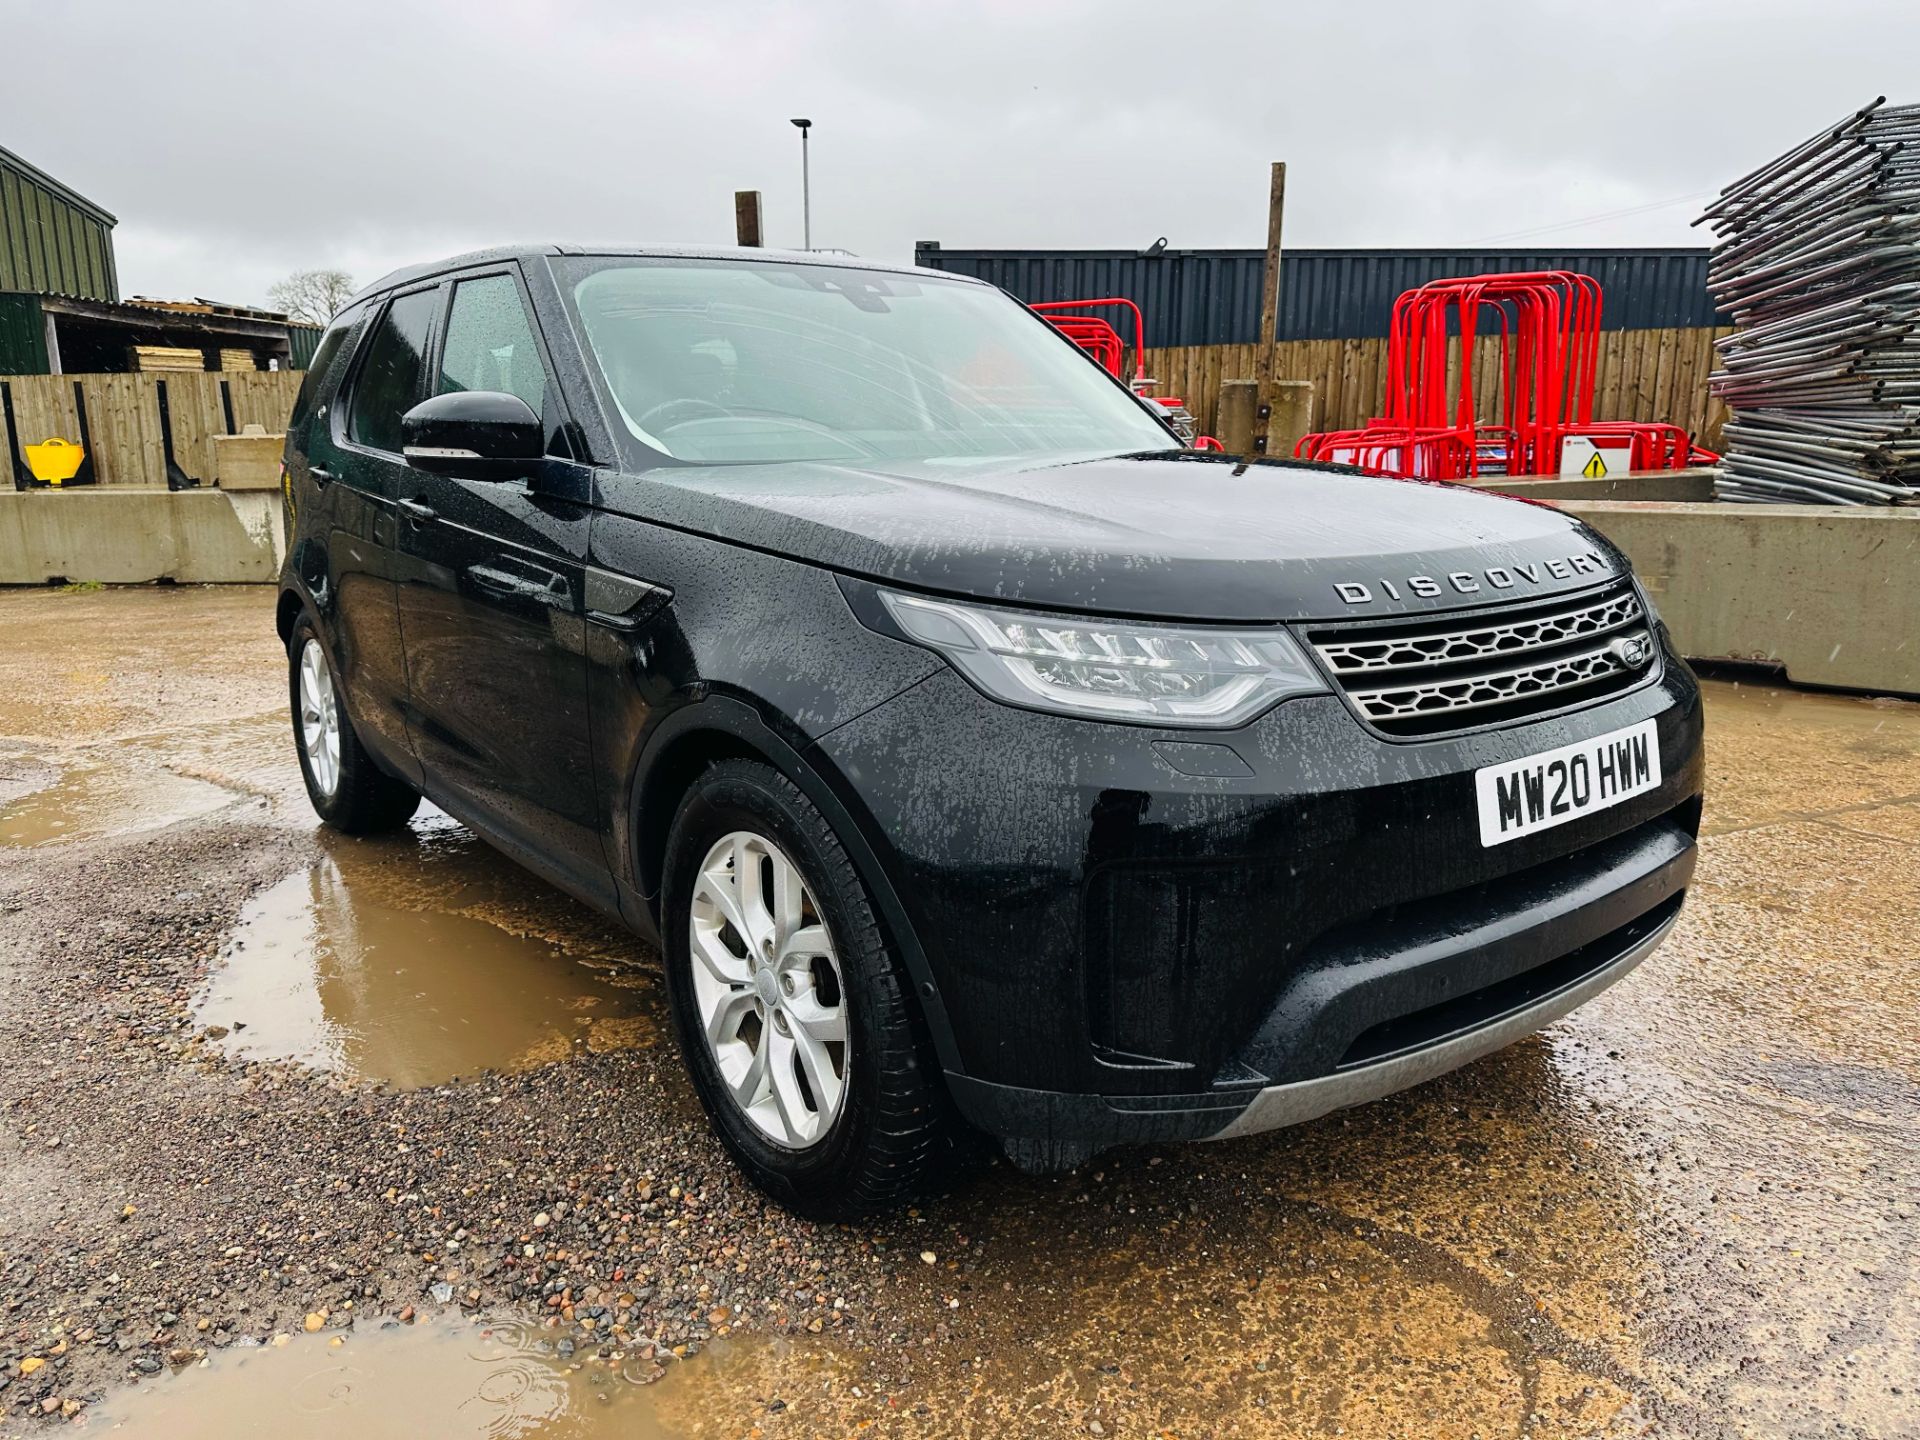 (Reserve Met) Land Rover Discovery SE Automatic (Black Edition) - 2020 Model - Only 57k Miles! - Image 2 of 40